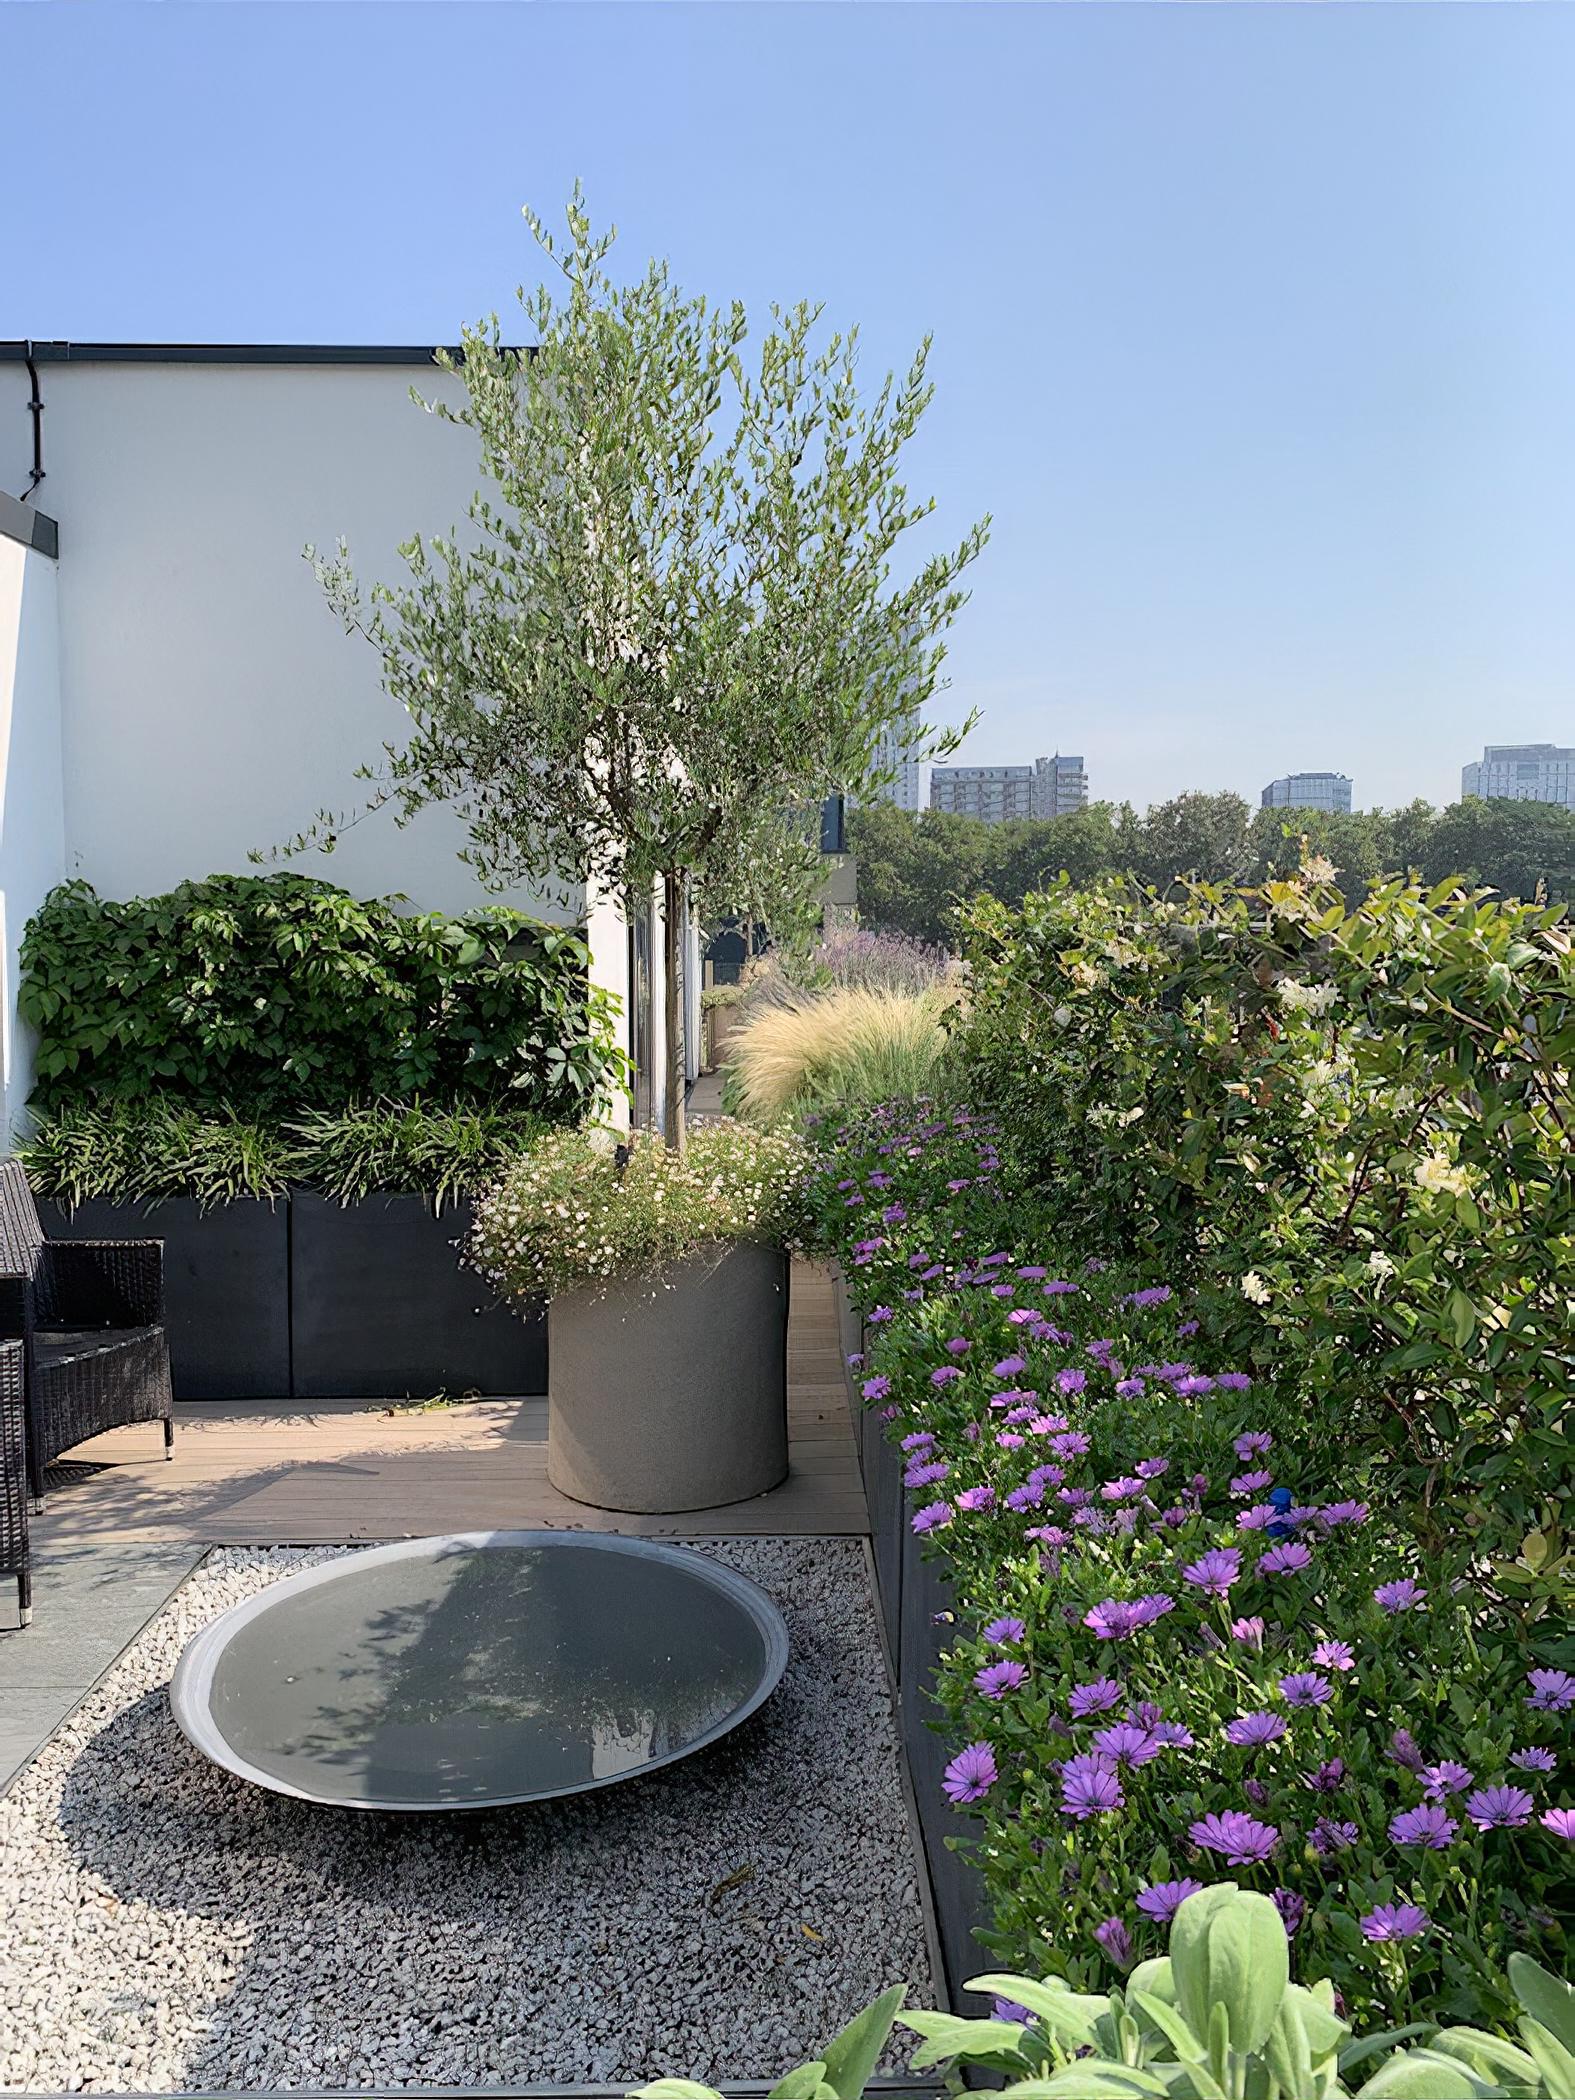 How to Design the Perfect Roof Garden by John Wyer at Bowles & Wyer 